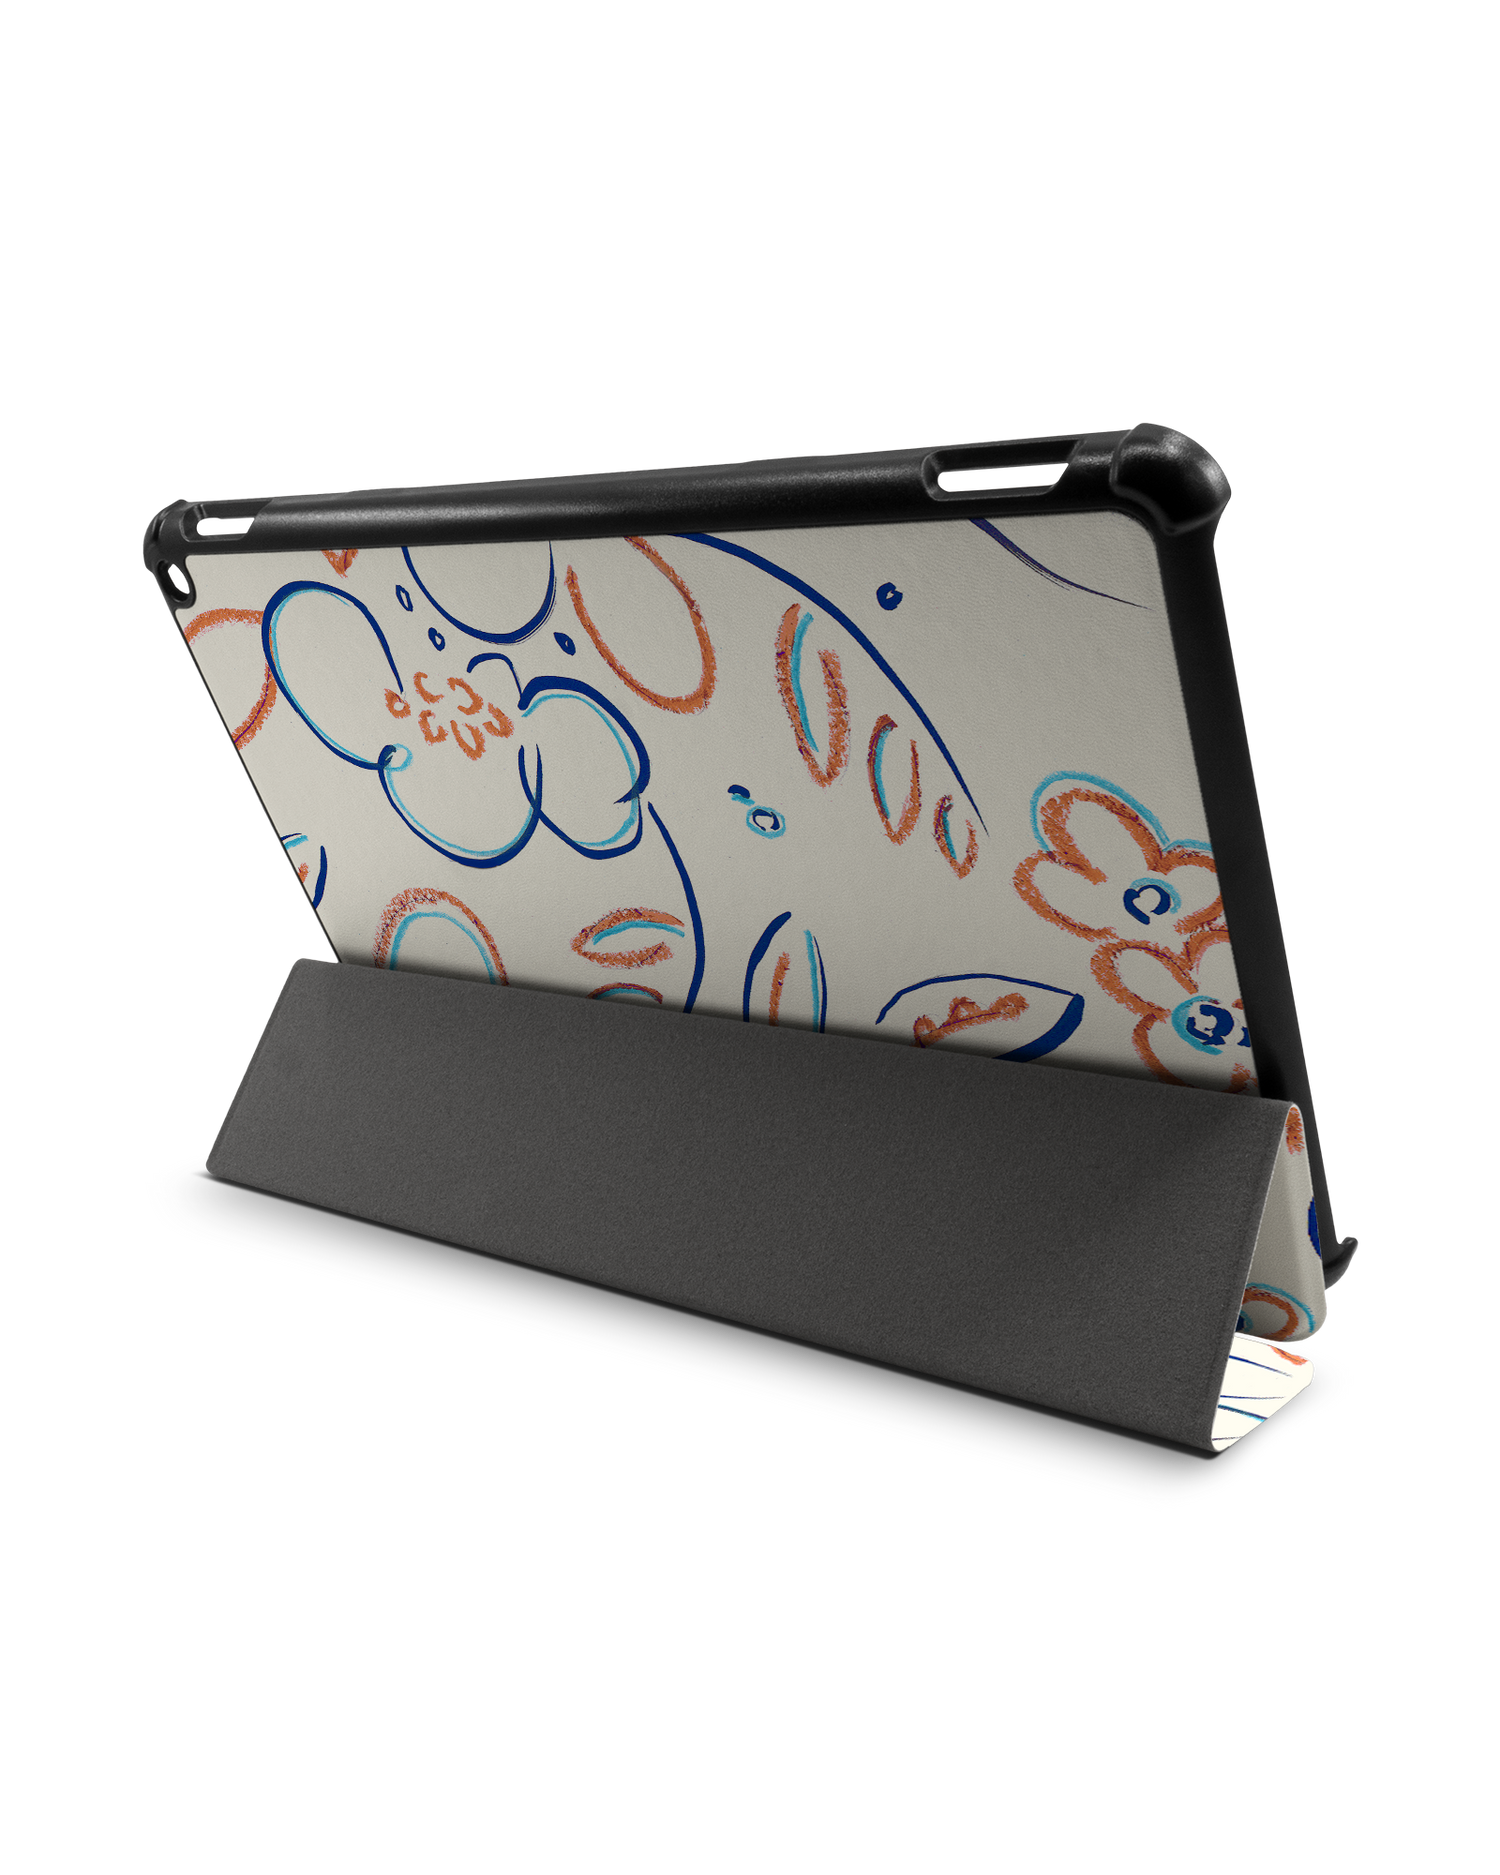 Bloom Doodles Tablet Smart Case for Amazon Fire HD 10 (2021): Used as Stand